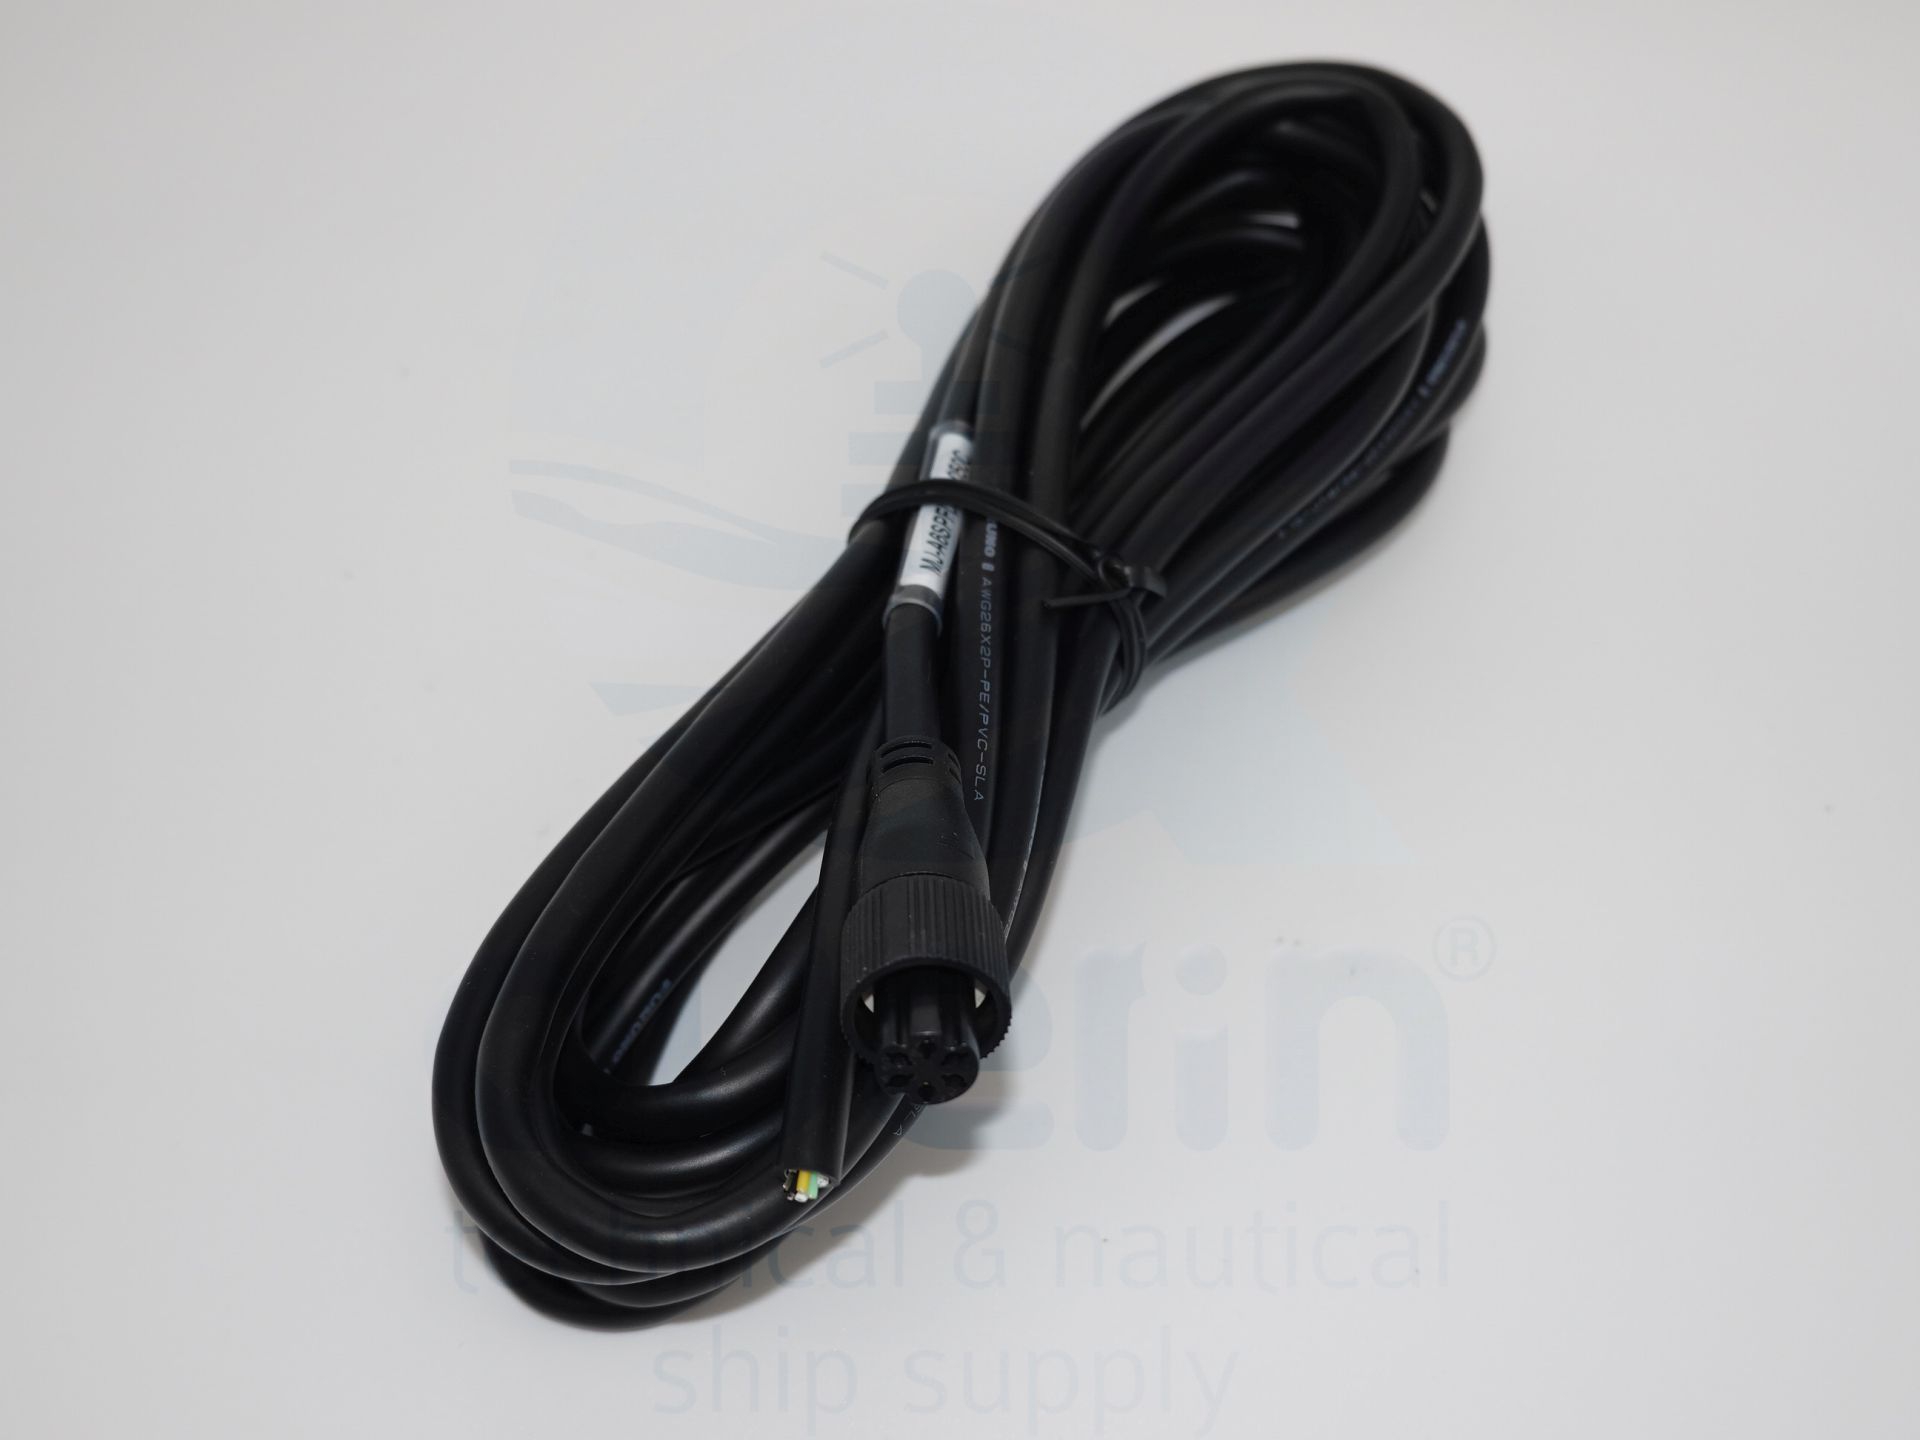 FURUNO 6-pin NMEA0183 data cable (5m) buy online Querin Shipsupply